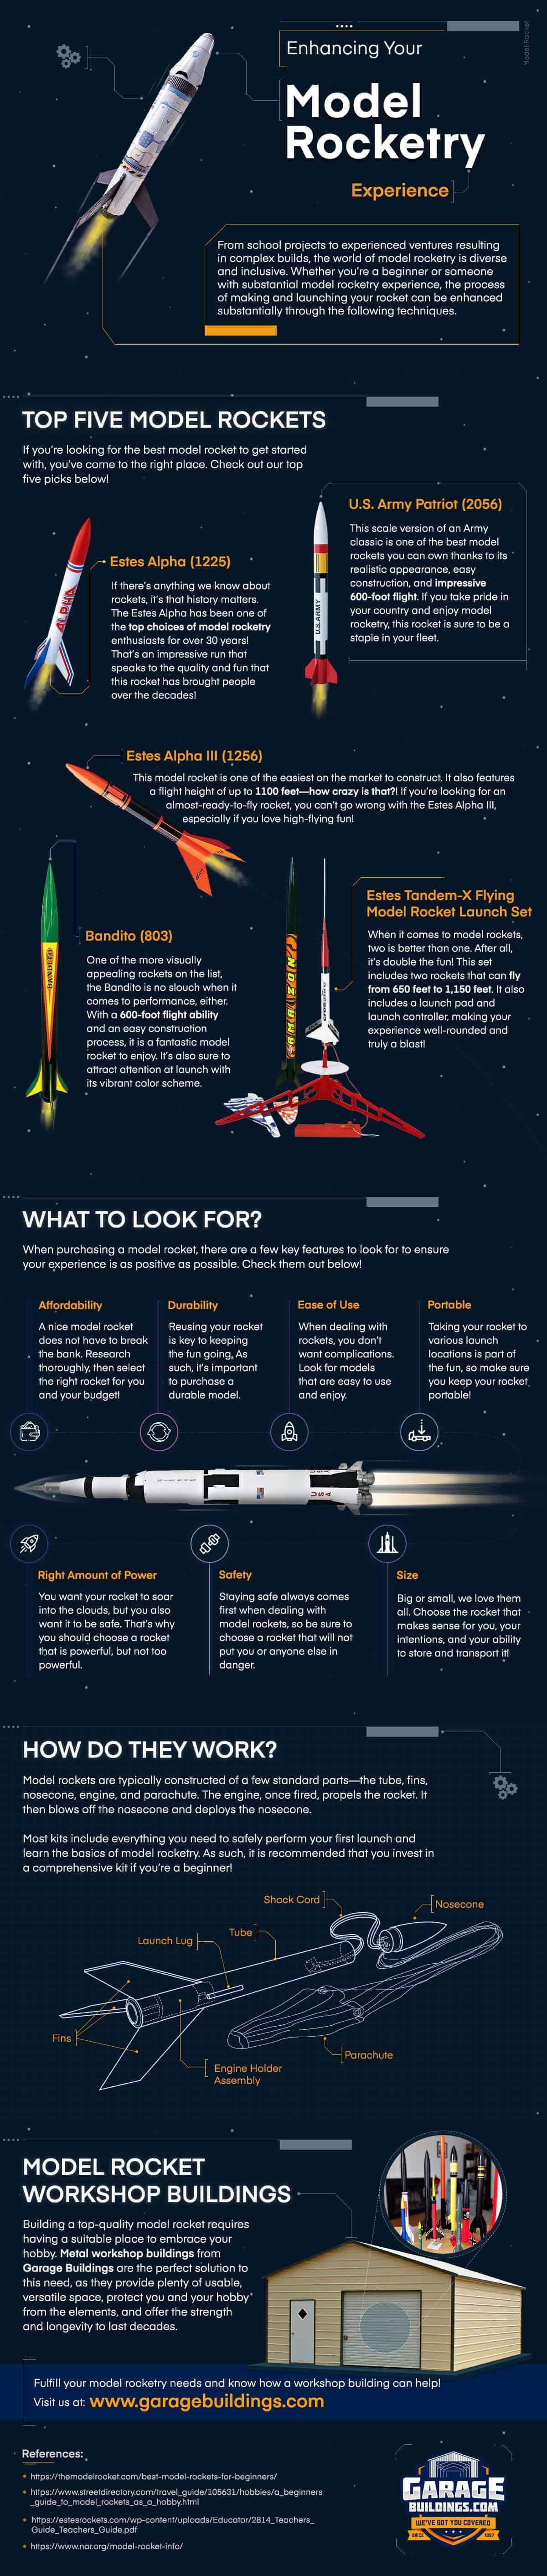 enhancing-your-model-rocketry-experience-infographic